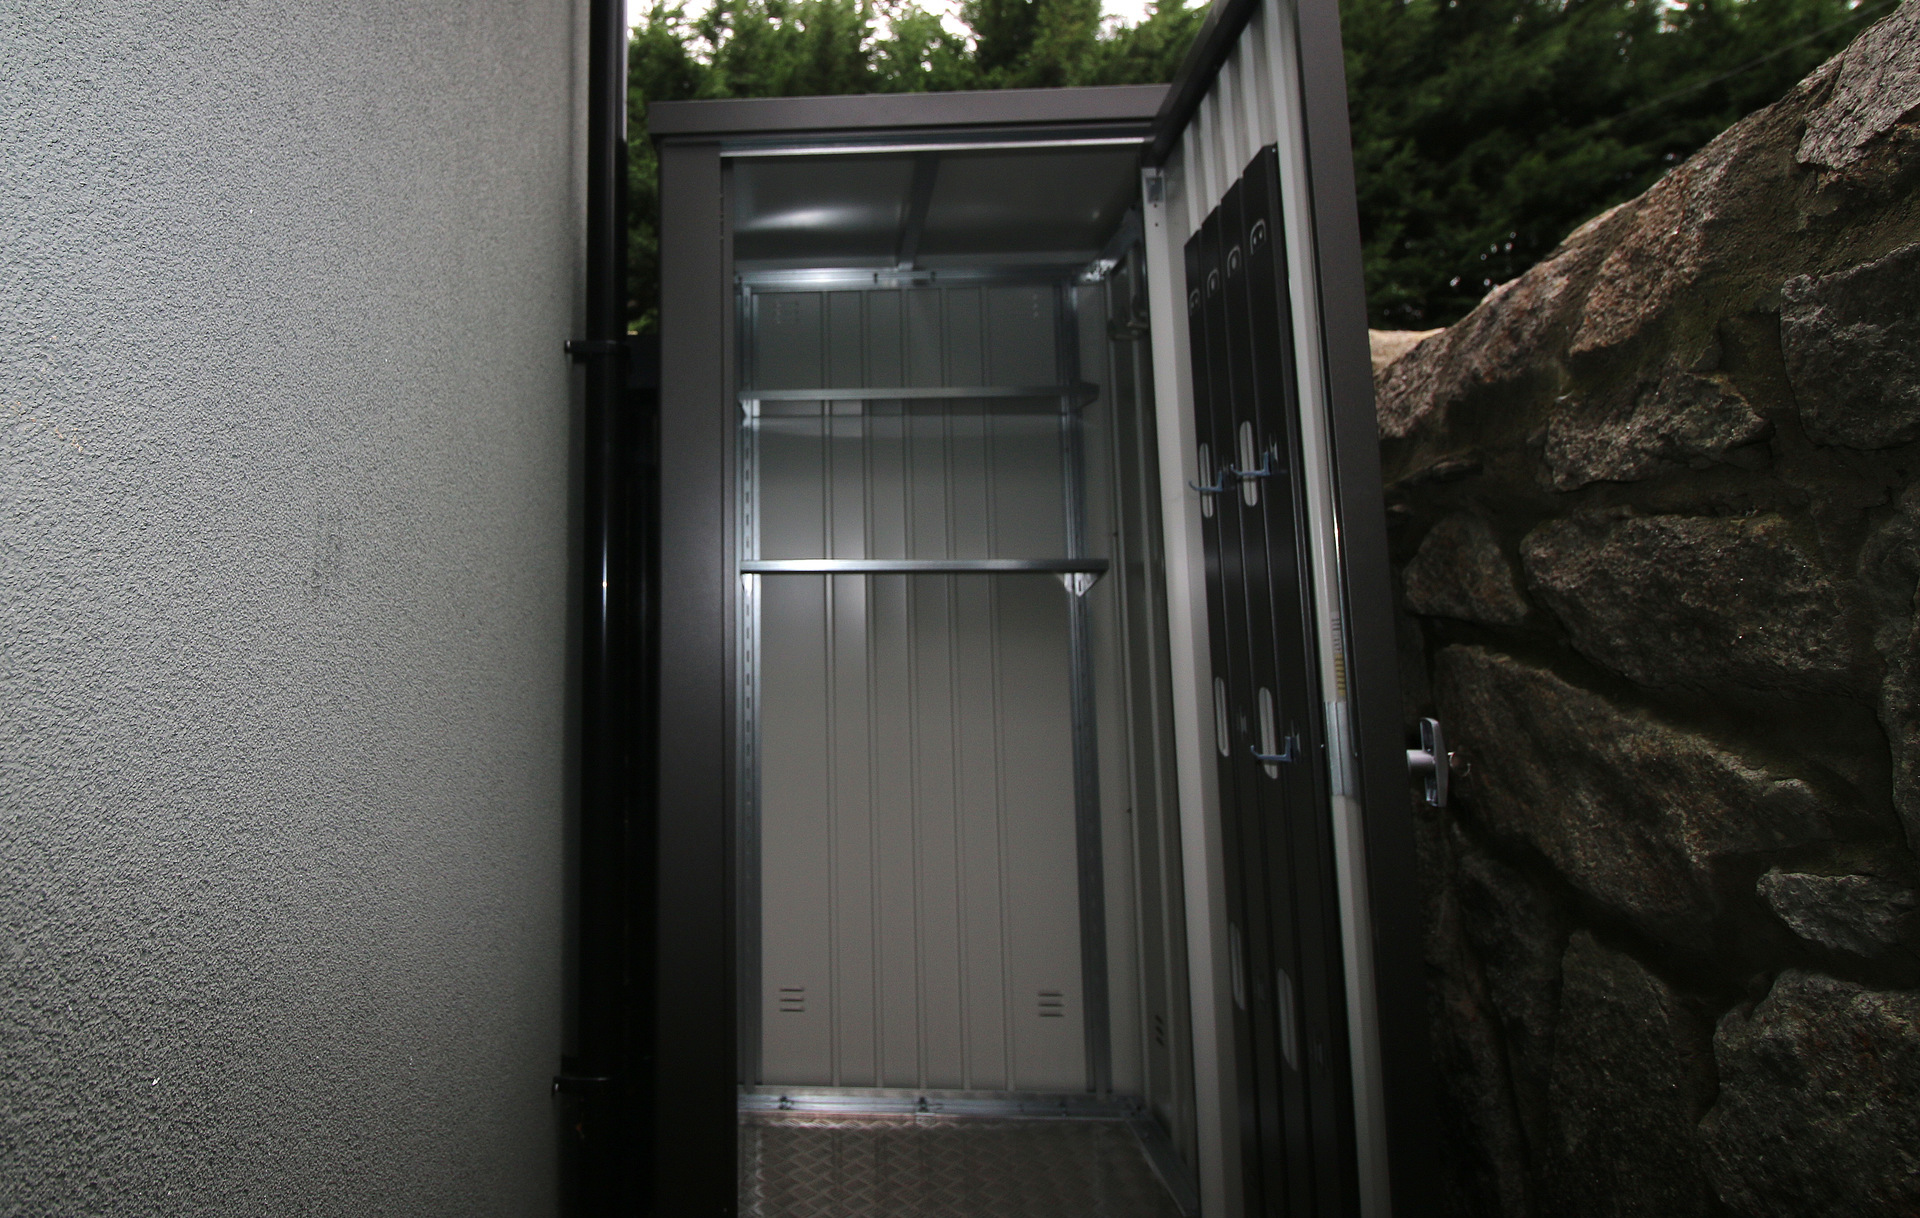 The superb quality and style of the Biohort Equipment Locker 90 in metallic dark grey  | supplied + installed in Dalkey, Co Dublin  by Owen Chubb Landscapers. Ireland's # 1 Biohort Dealer and Biohort Certified Installation Partner. Tel 087-2306 128.